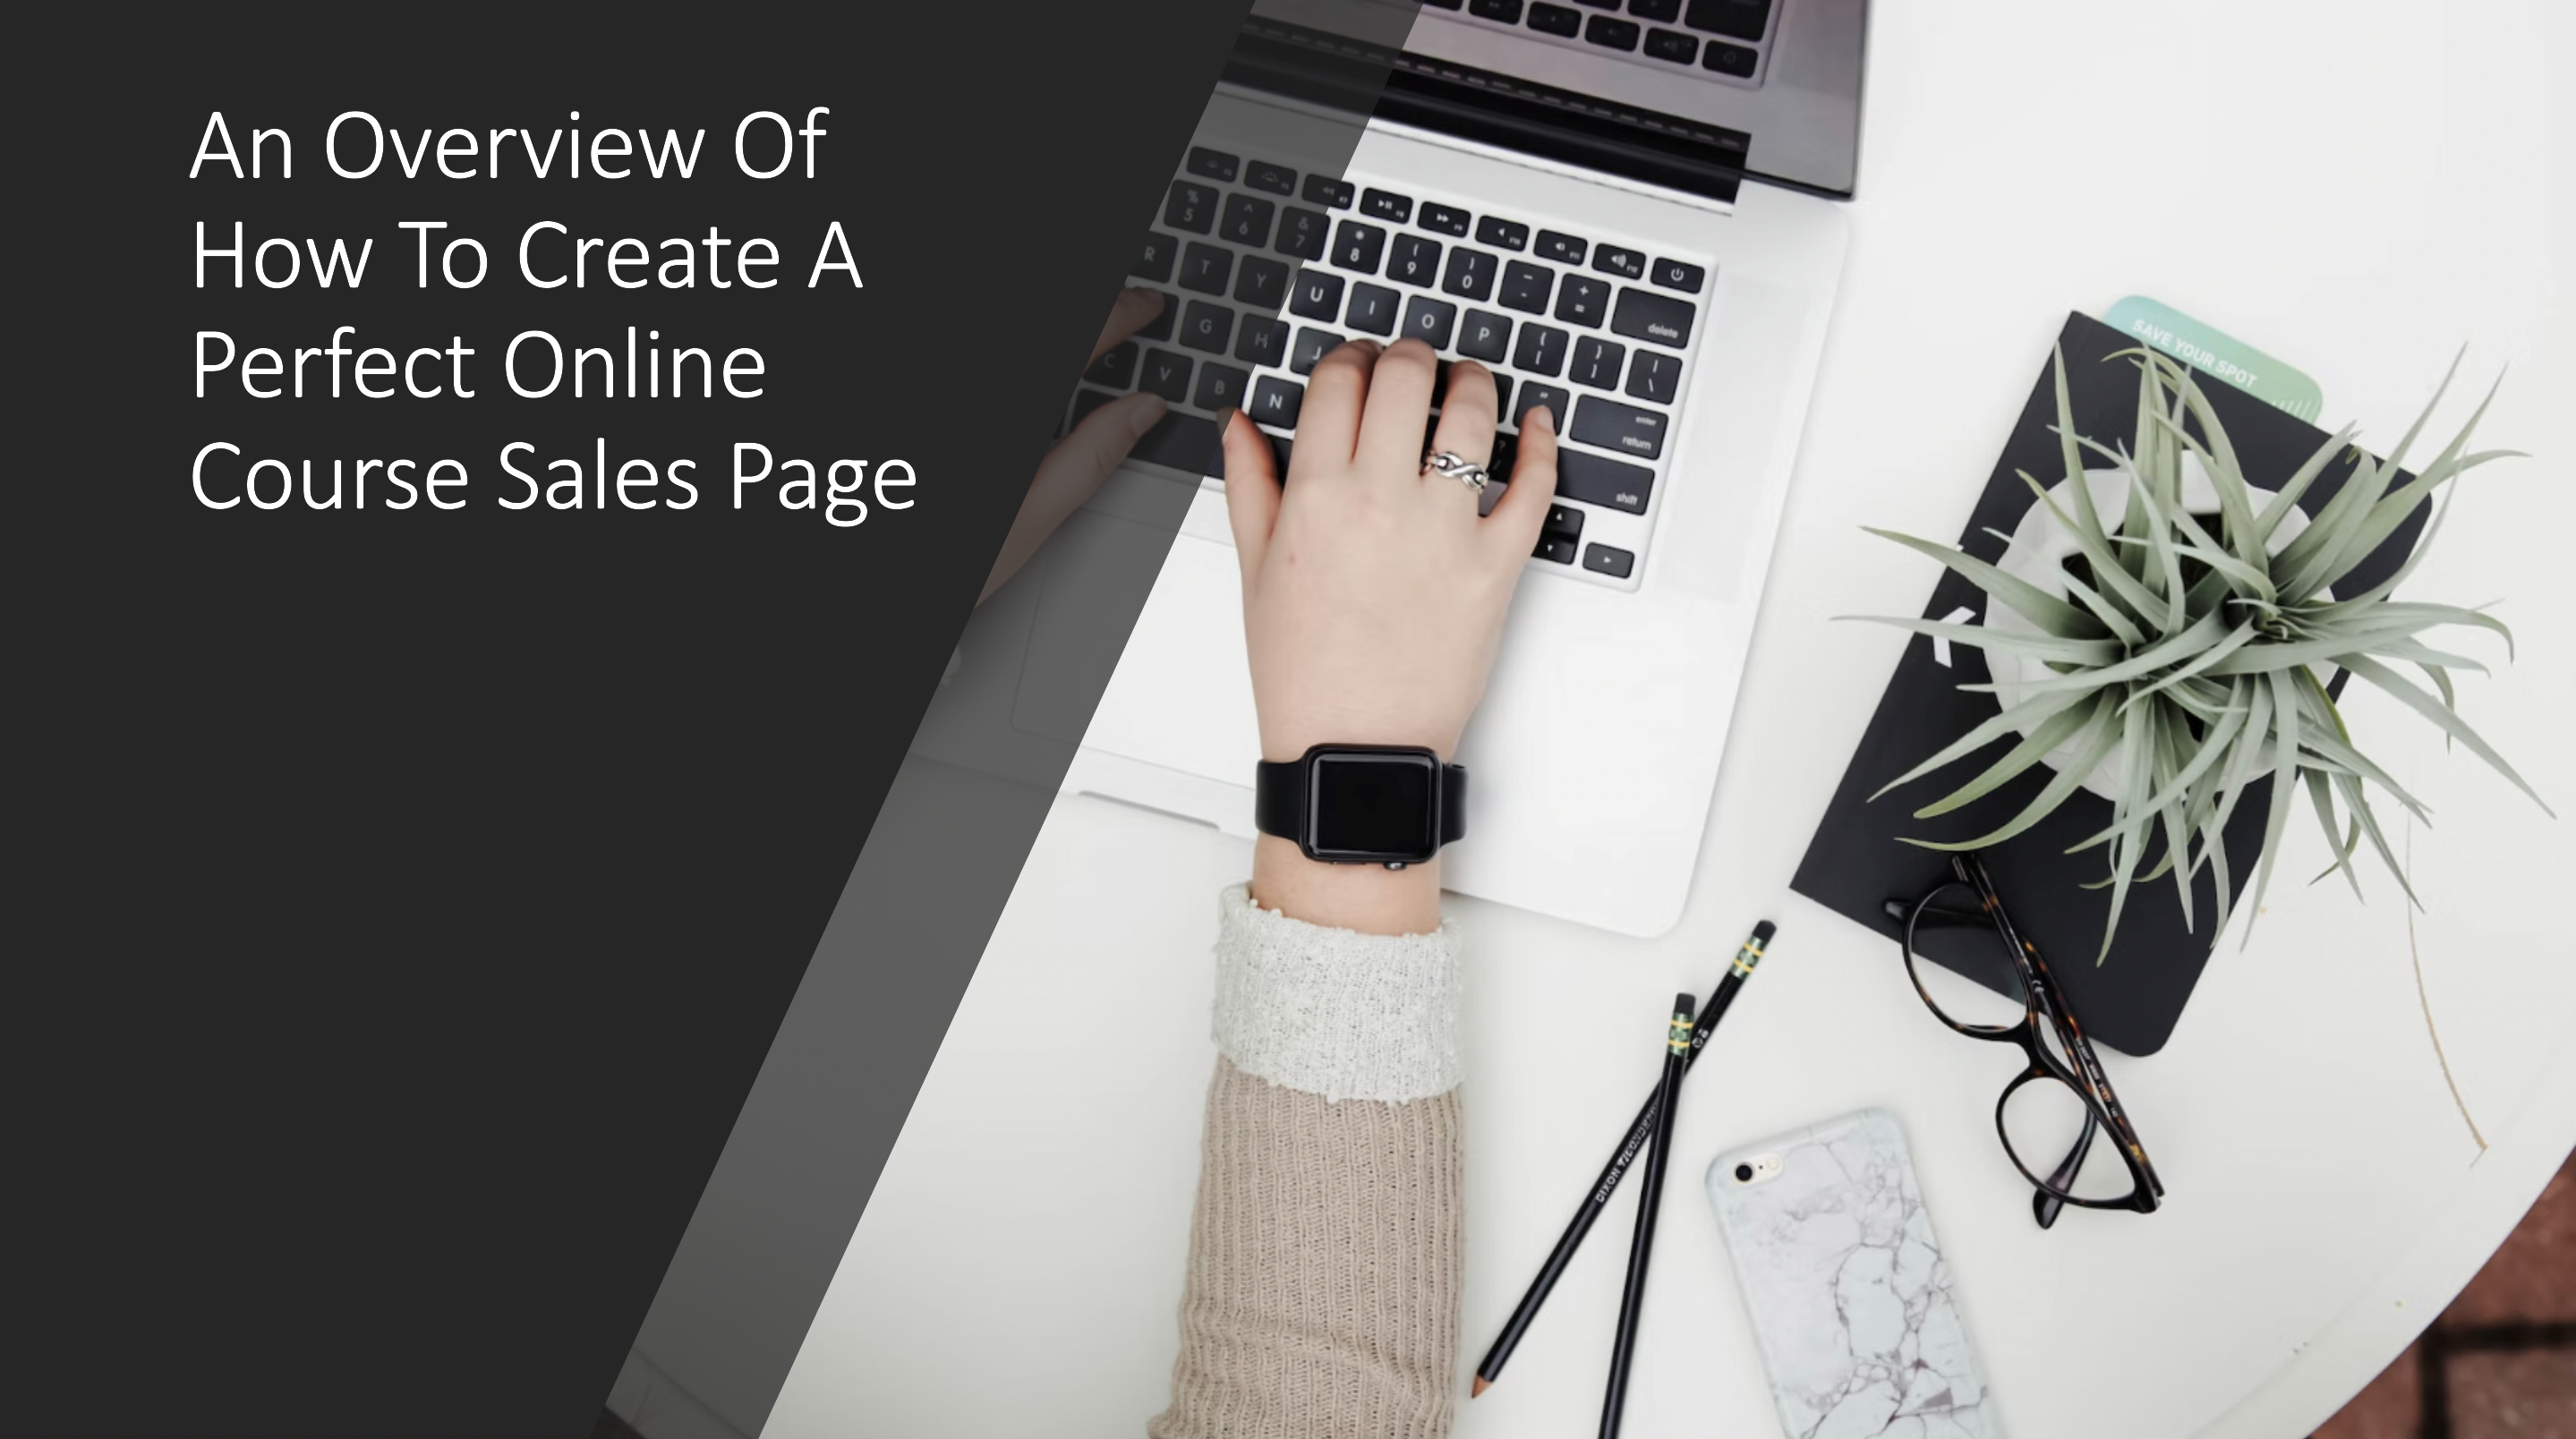 An Overview Of How To Create A Perfect Online Course Sales Page